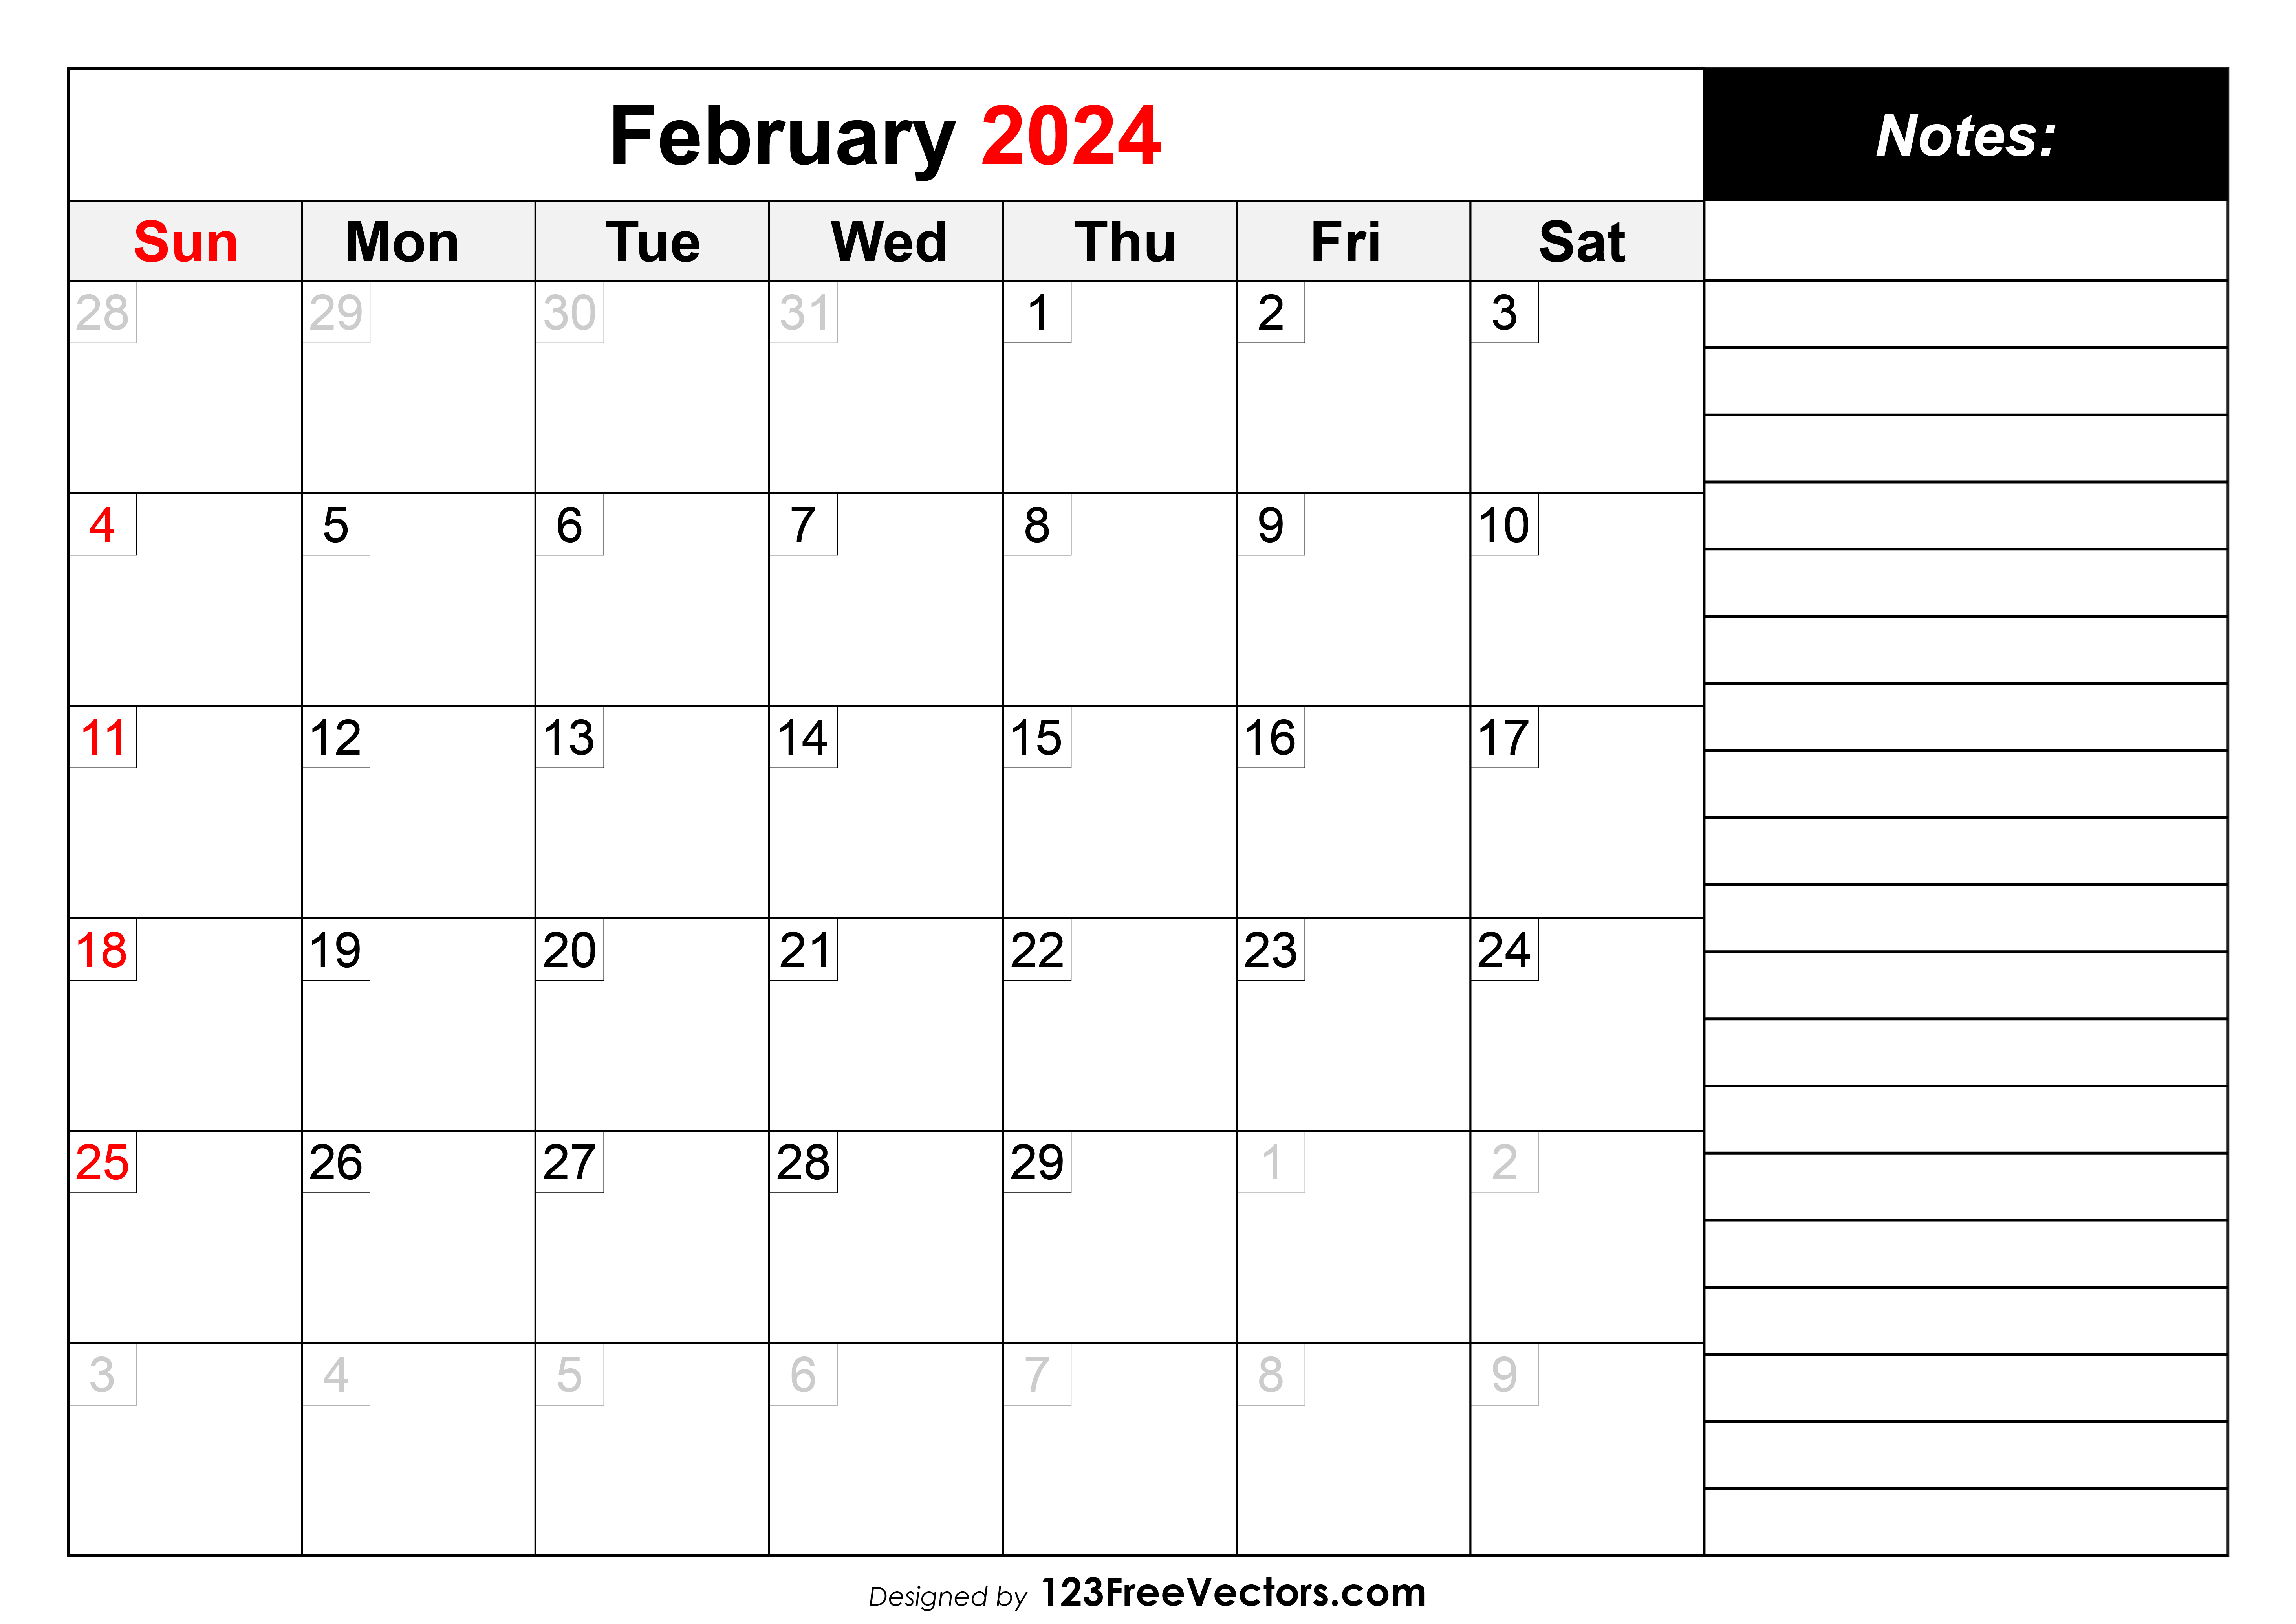 Add Reminders And Notes To My February 2024 Calendar Template Printable